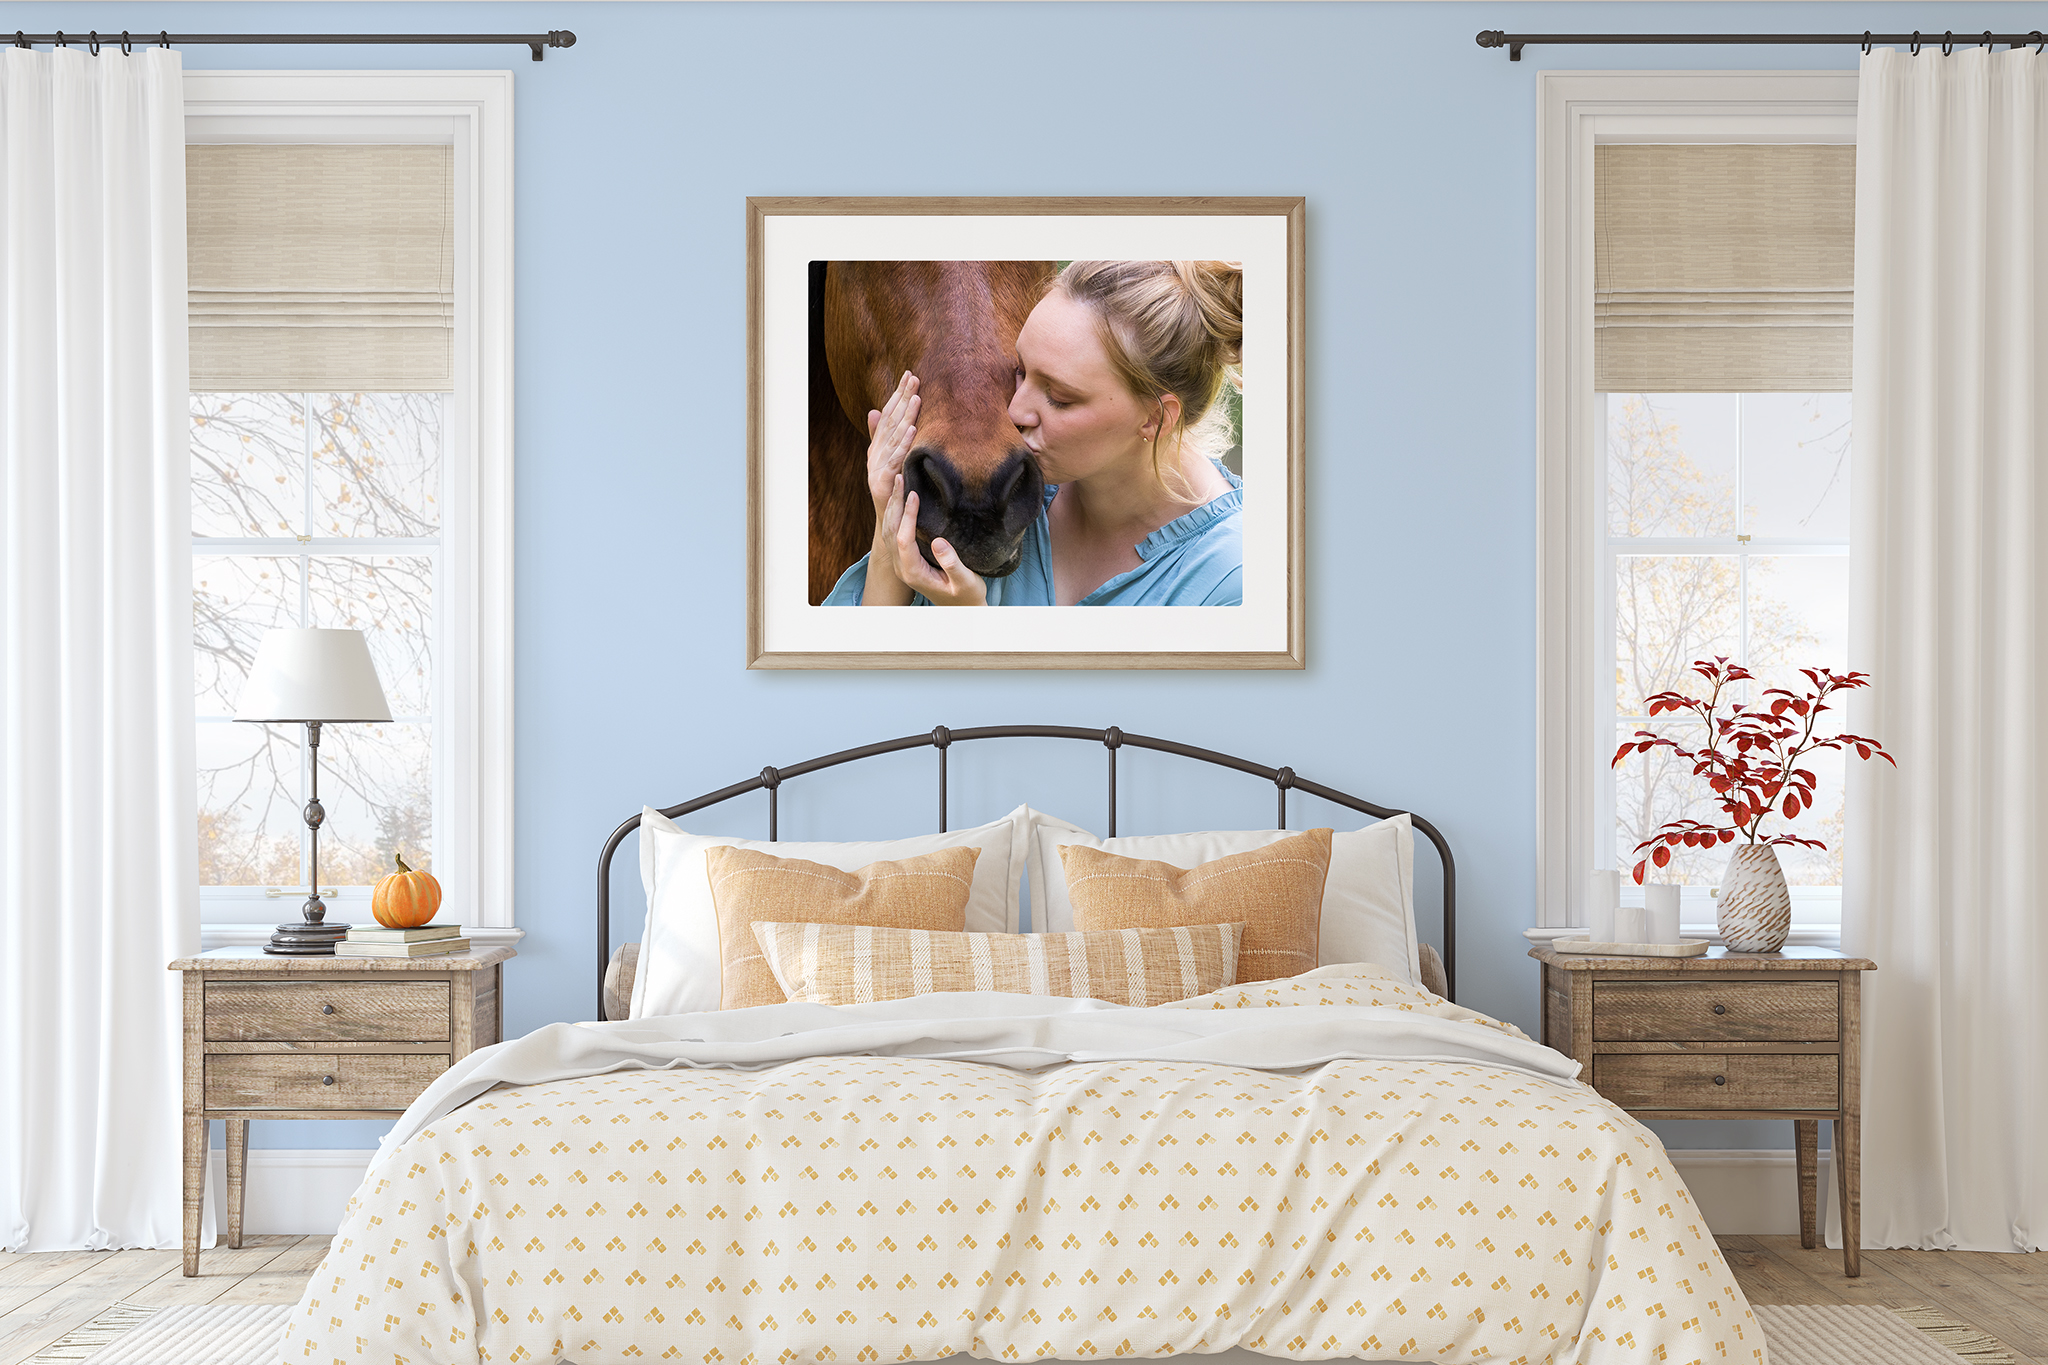 Framed and Matted Print of Woman kissing Horse Muzzle